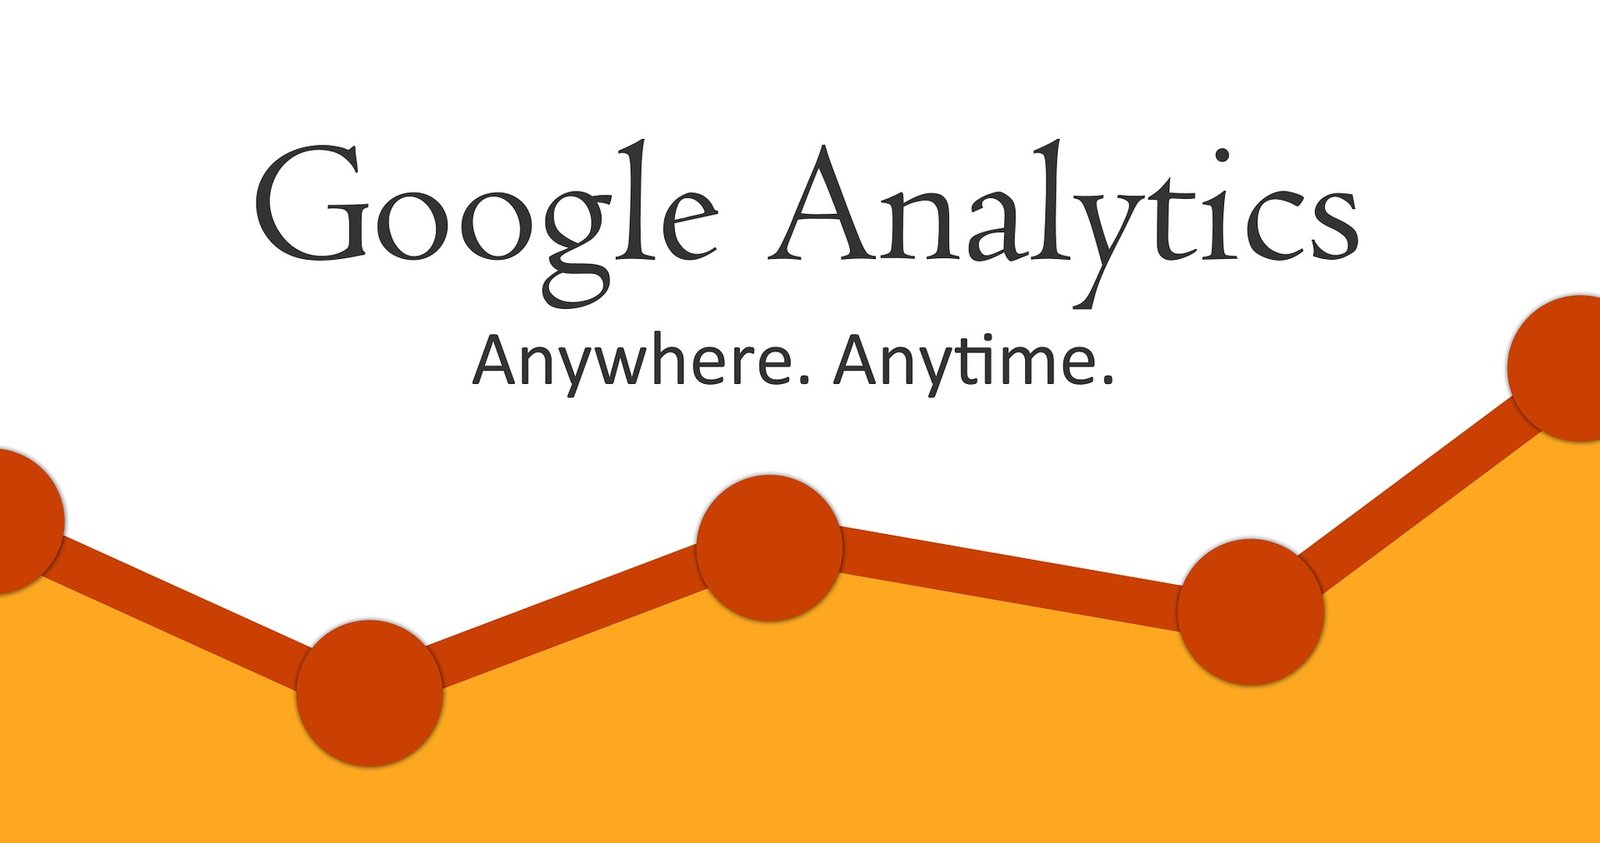 What is the google analytics exactly do